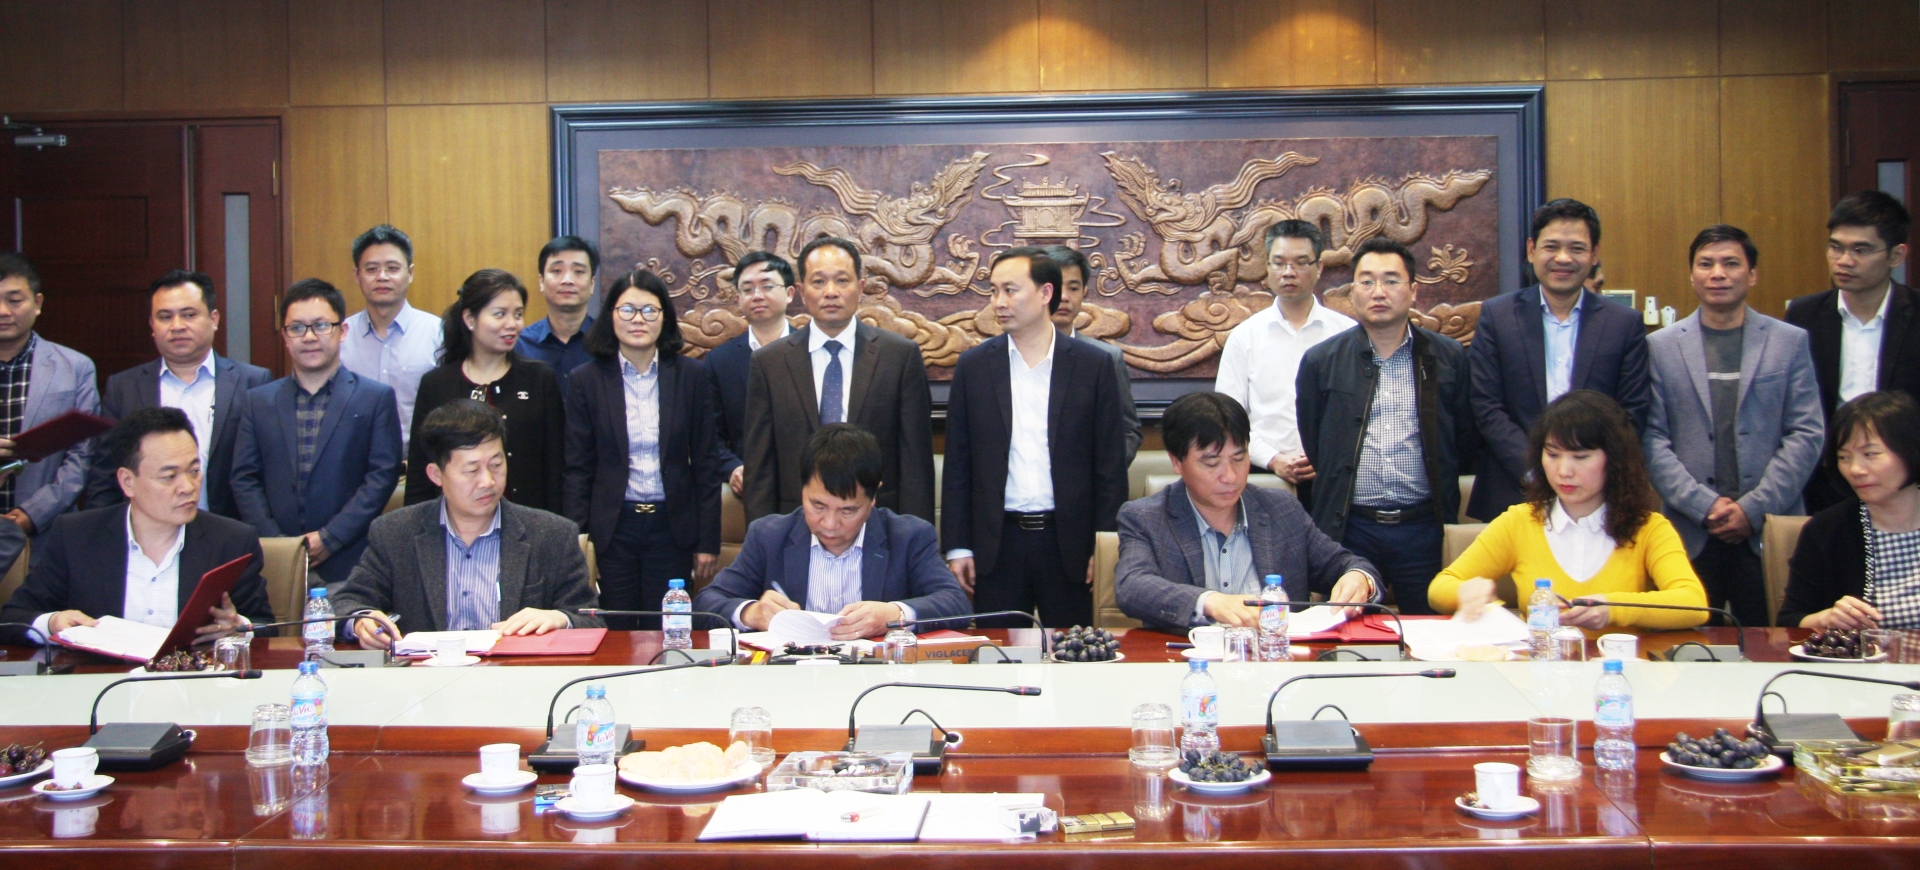 Viglacera had the first meeting of the Lunar New year 2018 and deployed planning tasks in 2018 with all departments and divisions of the Corporation